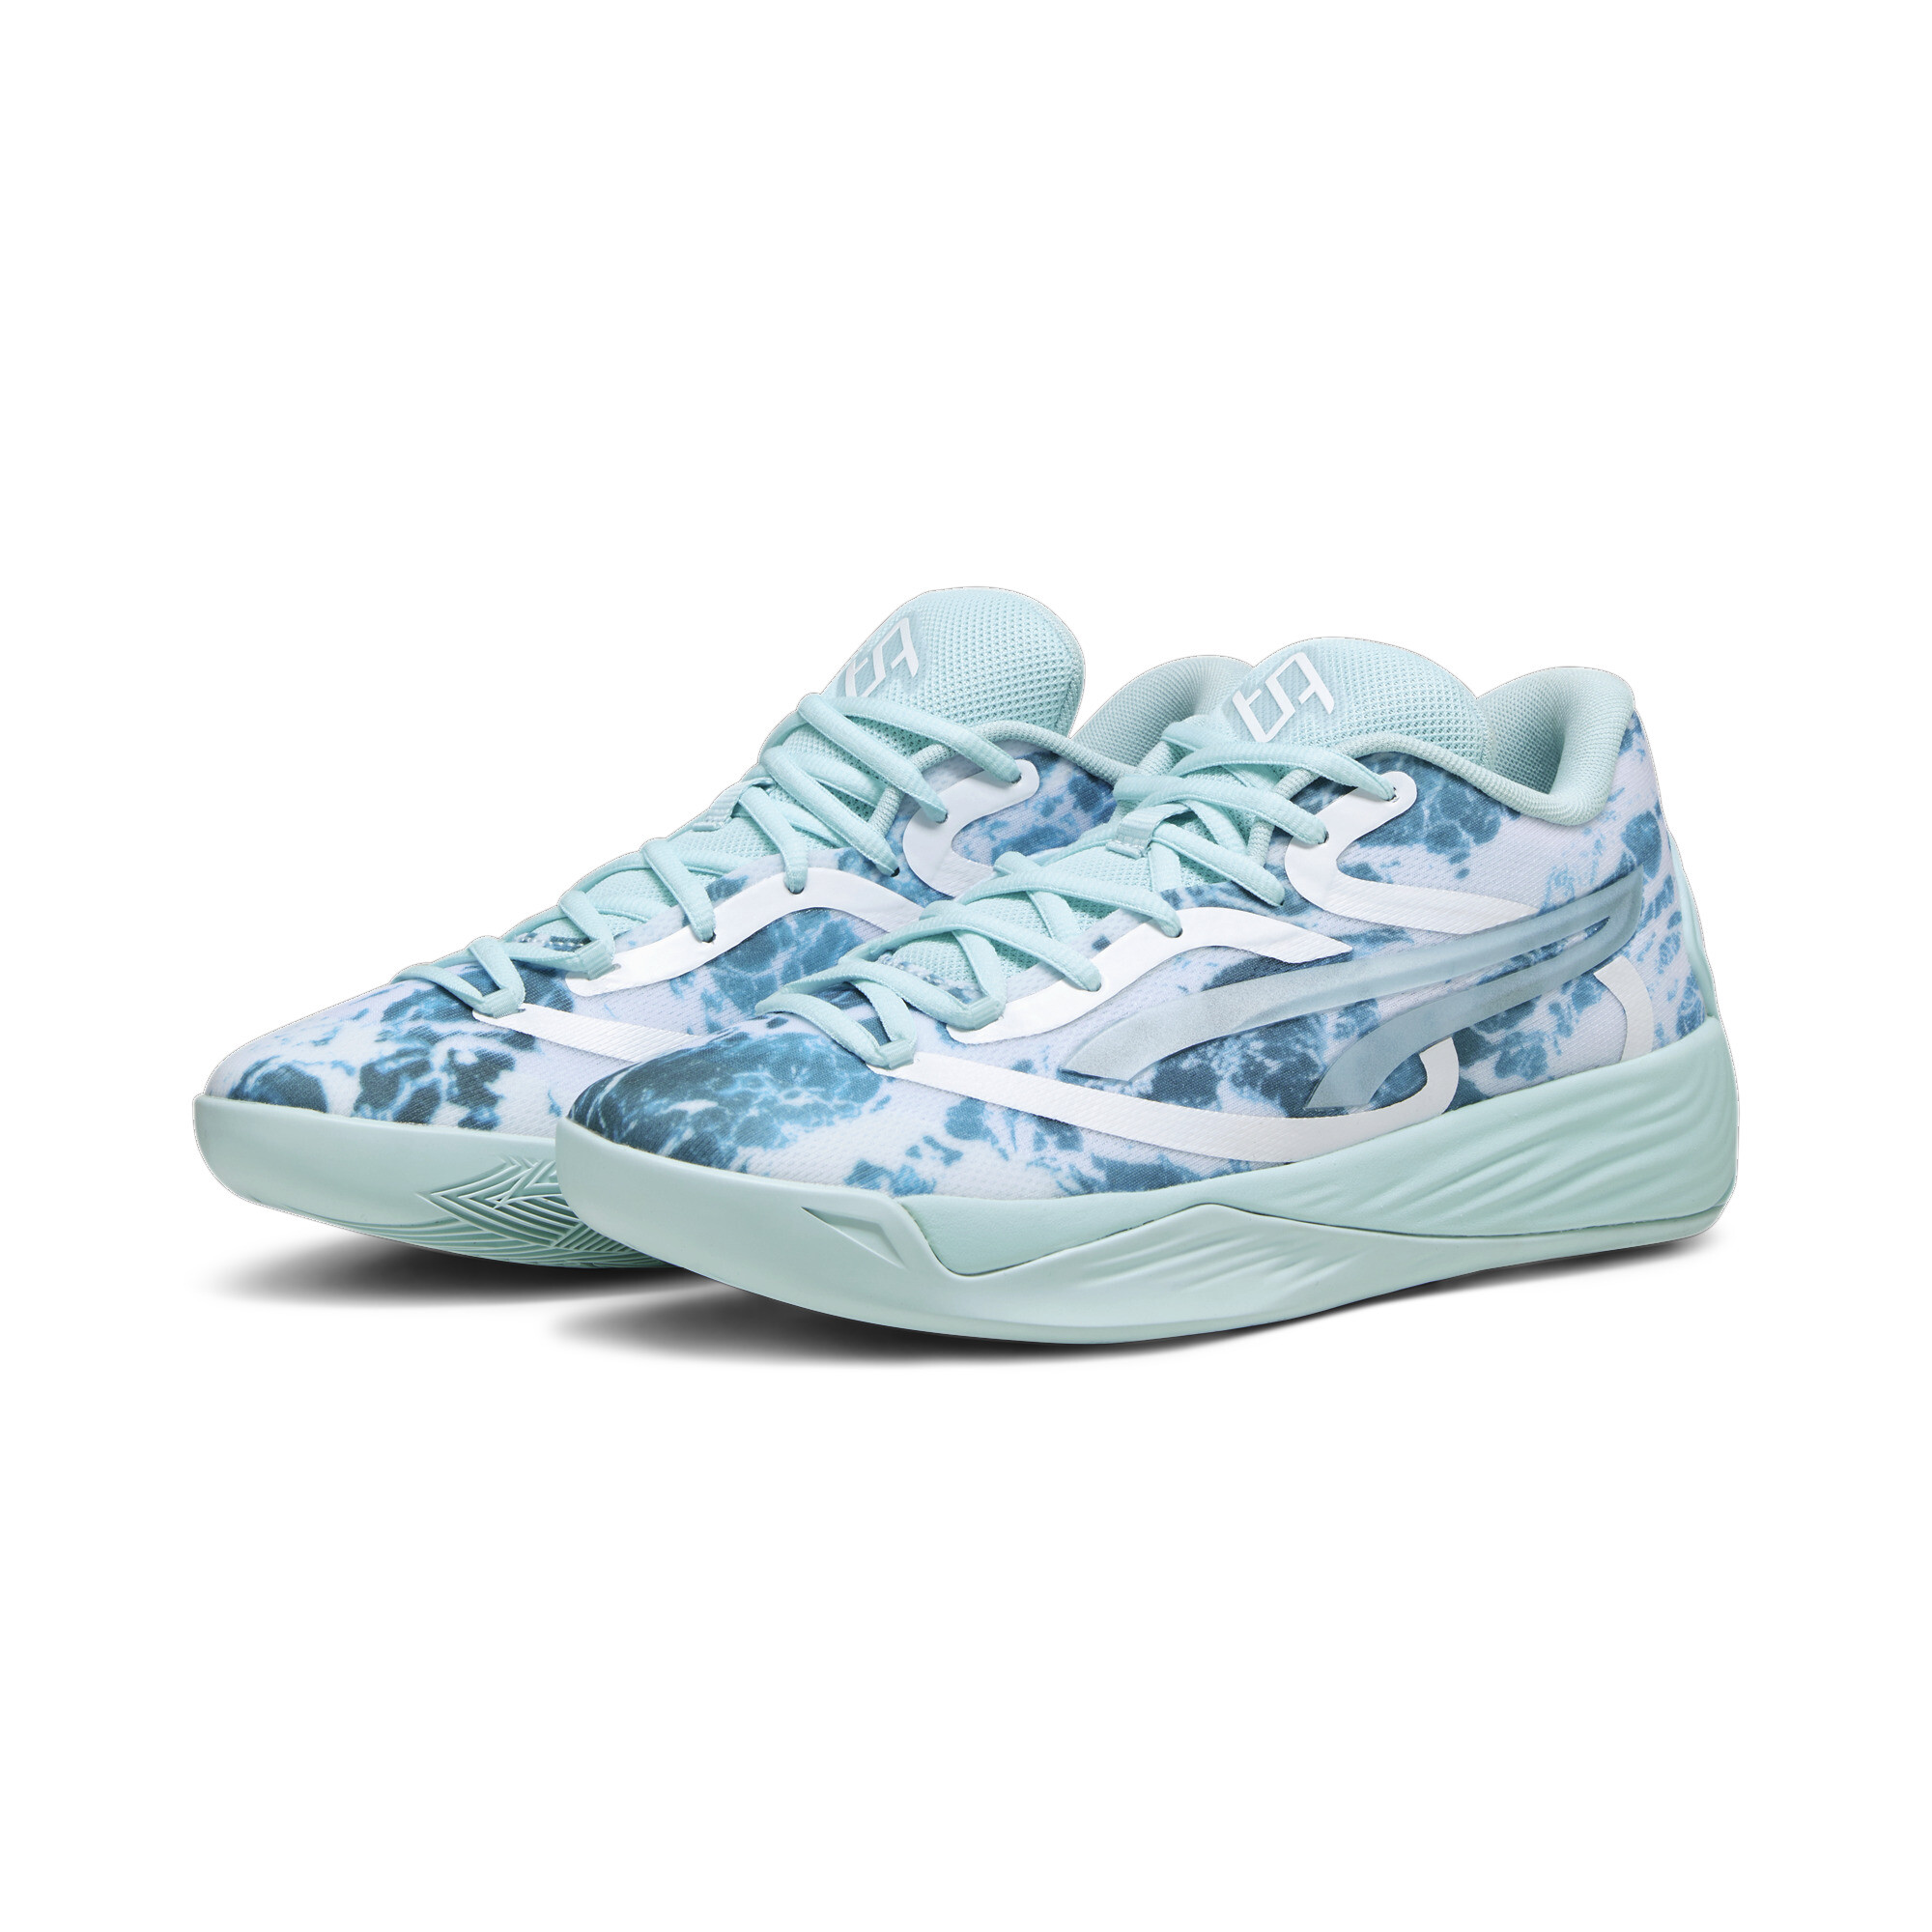 Women's Puma Stewie 2 Water's Basketball Shoes, Blue, Size 44, Shoes